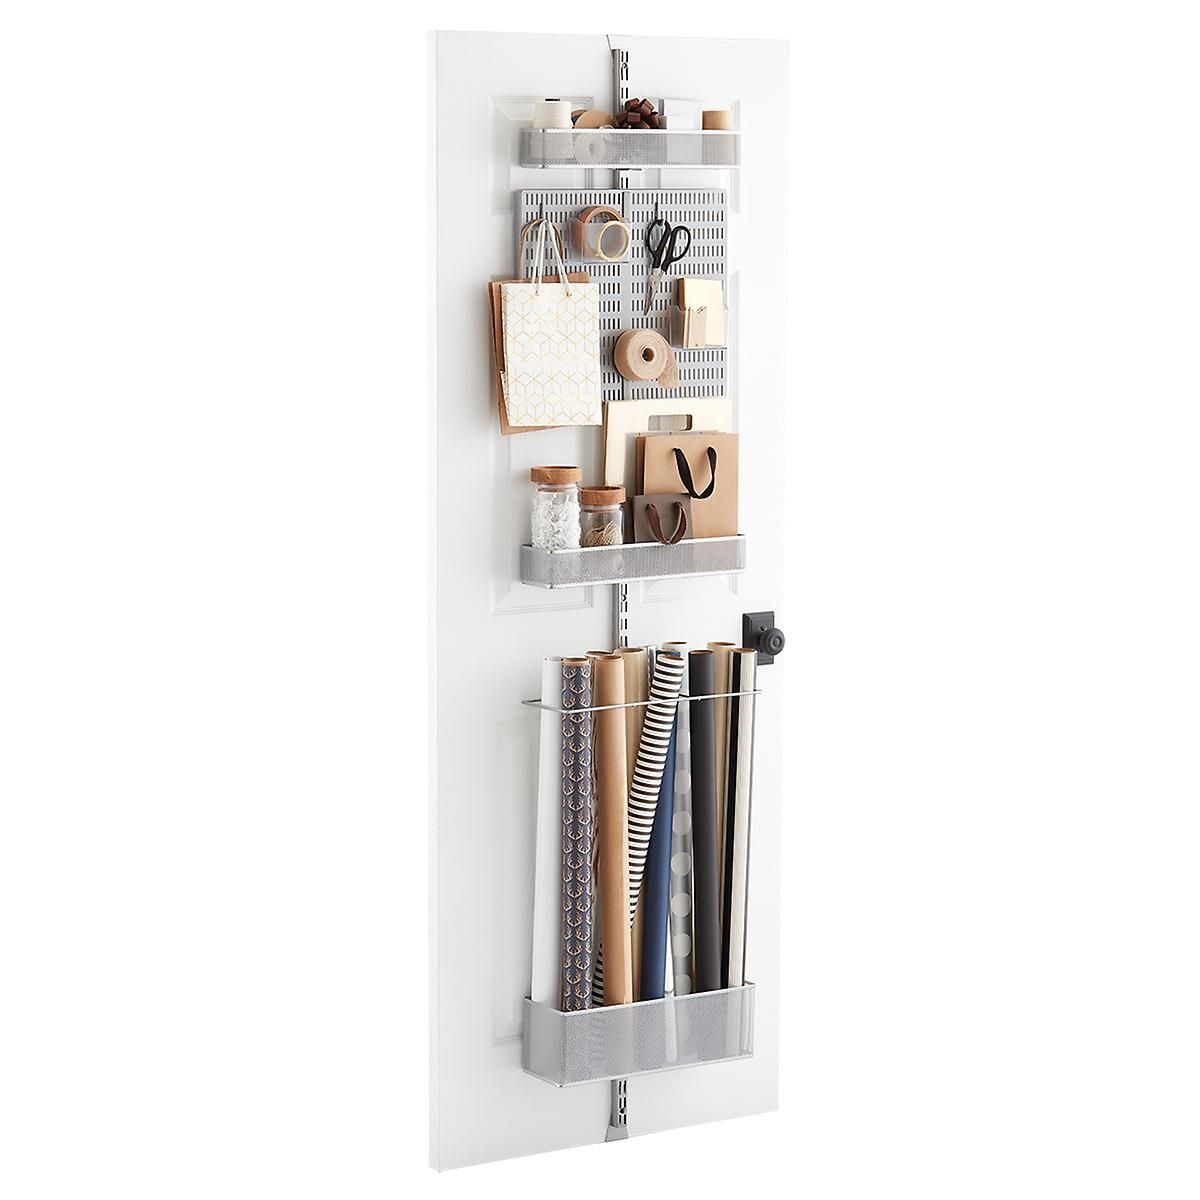 Elfa Utility Craft Room Over the Door Rack | The Container Store